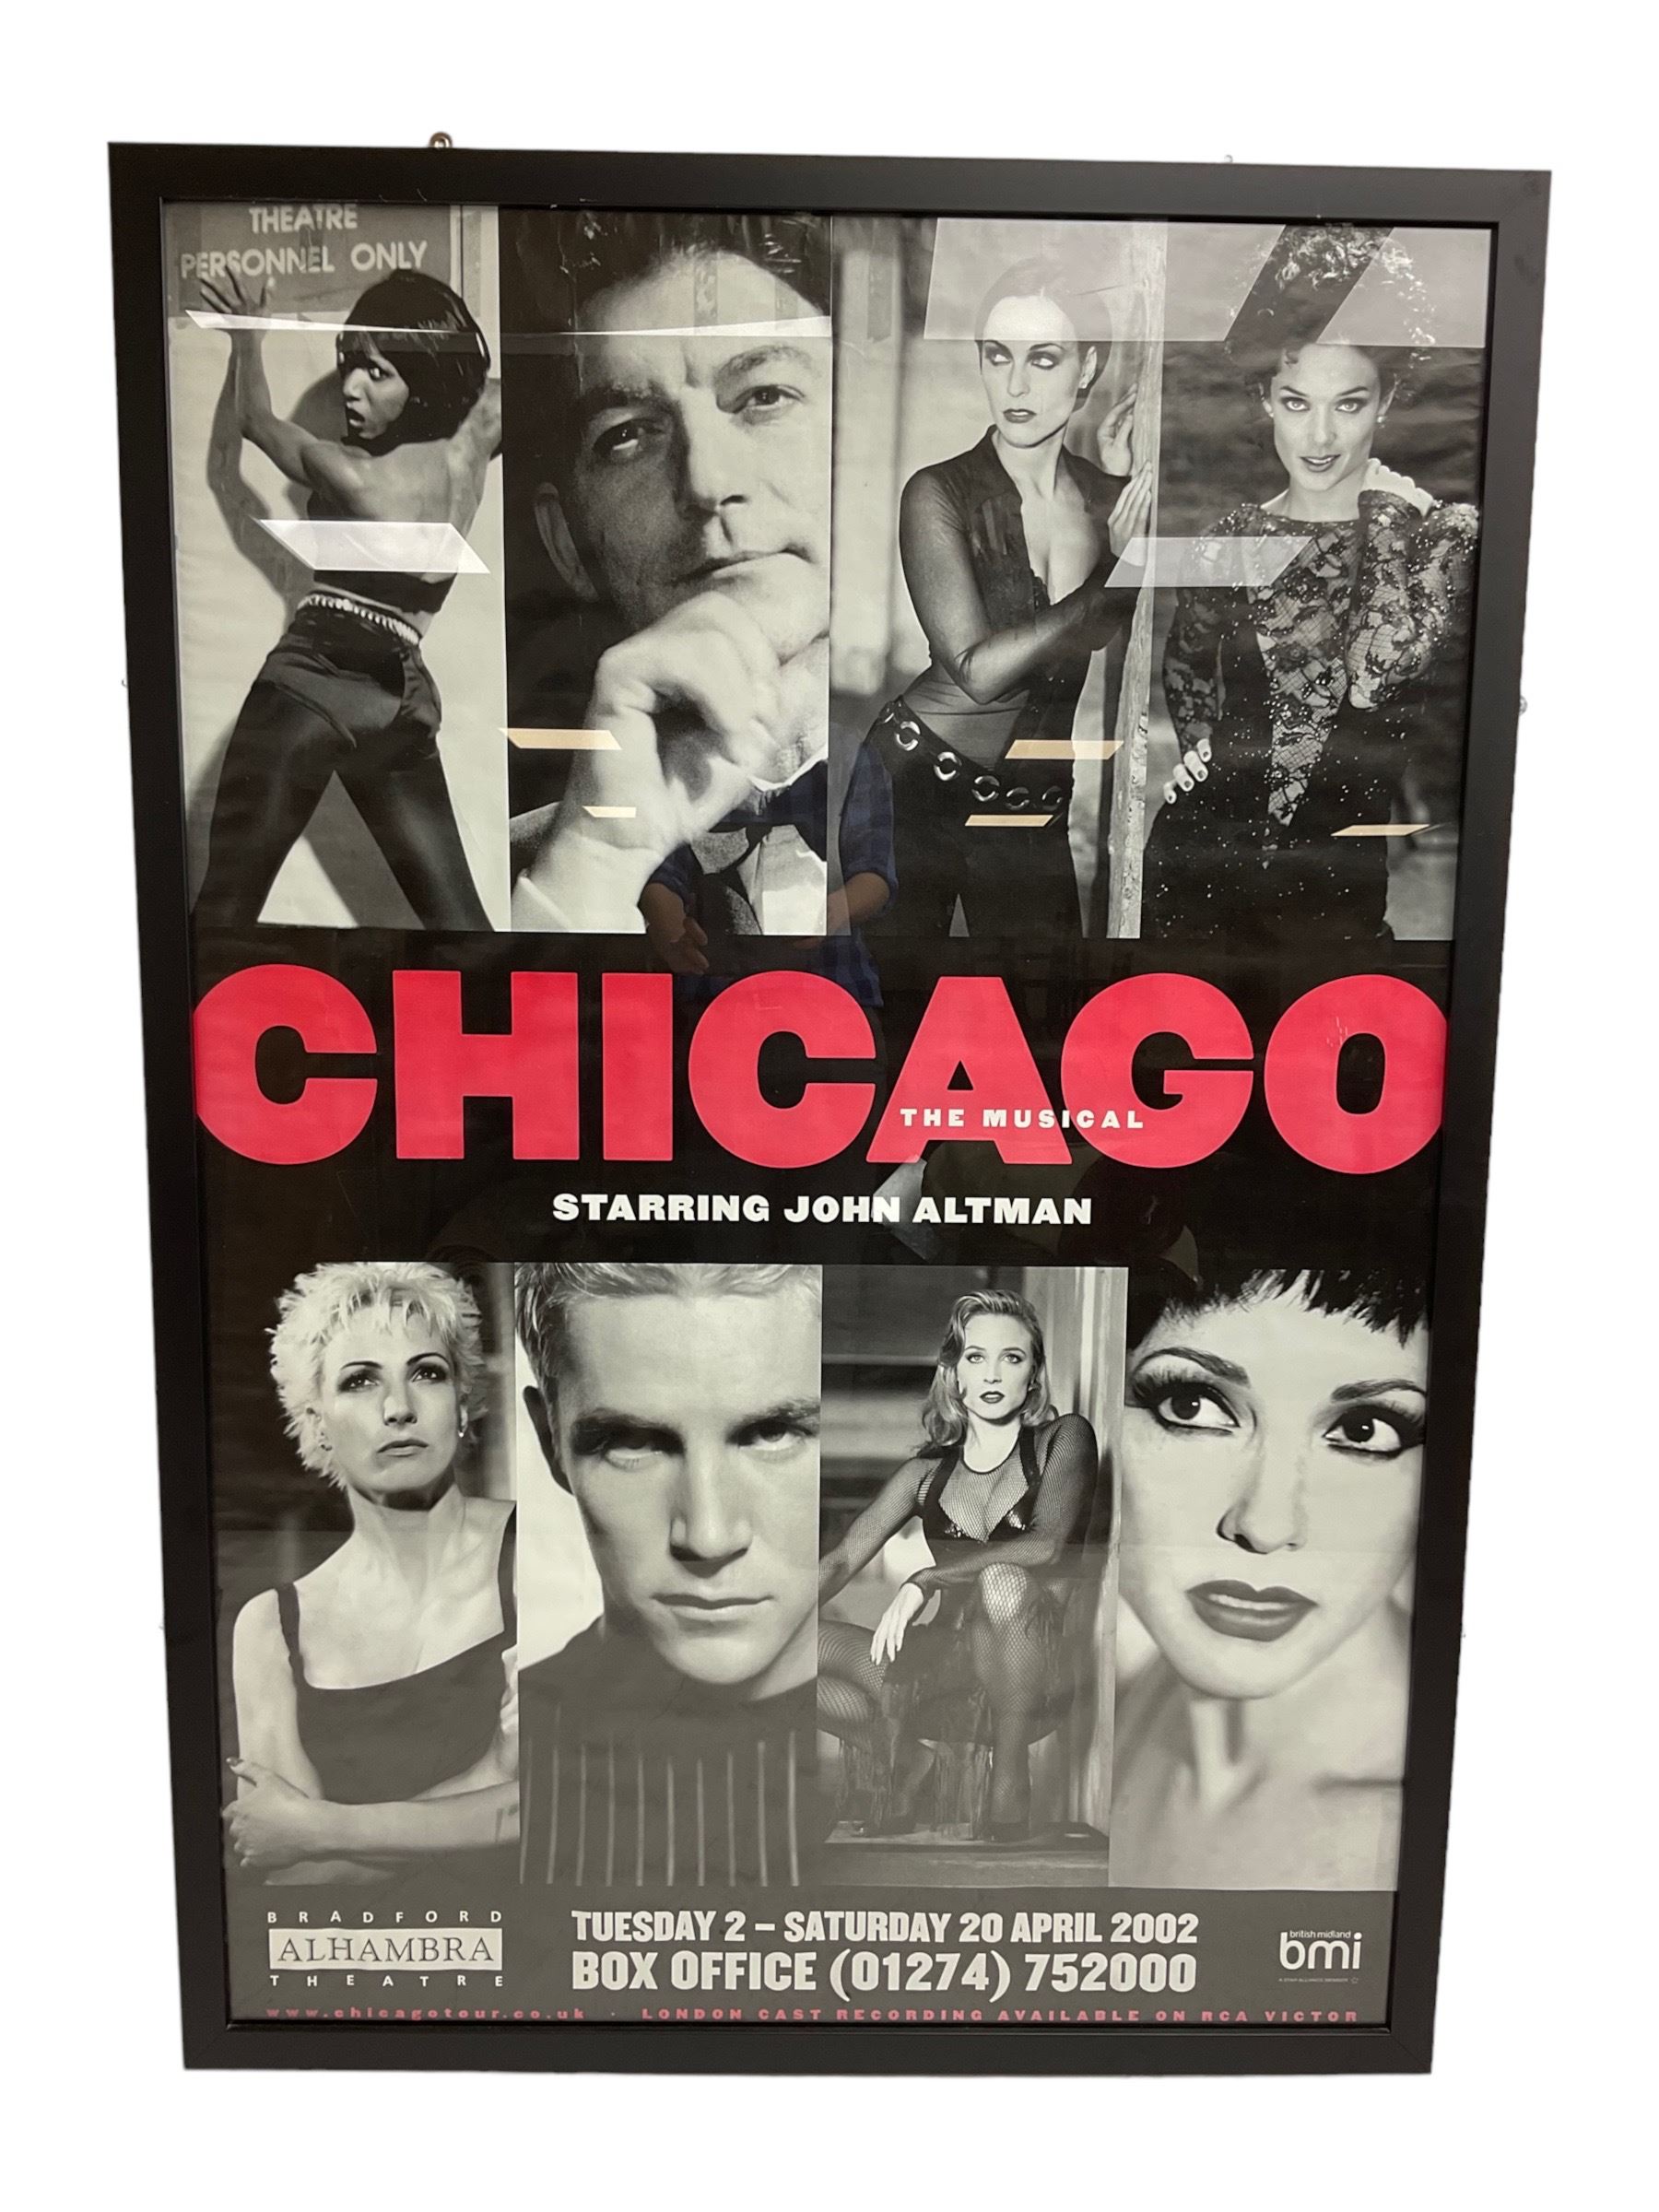 Large original theatre poster for Chicago: The Musical